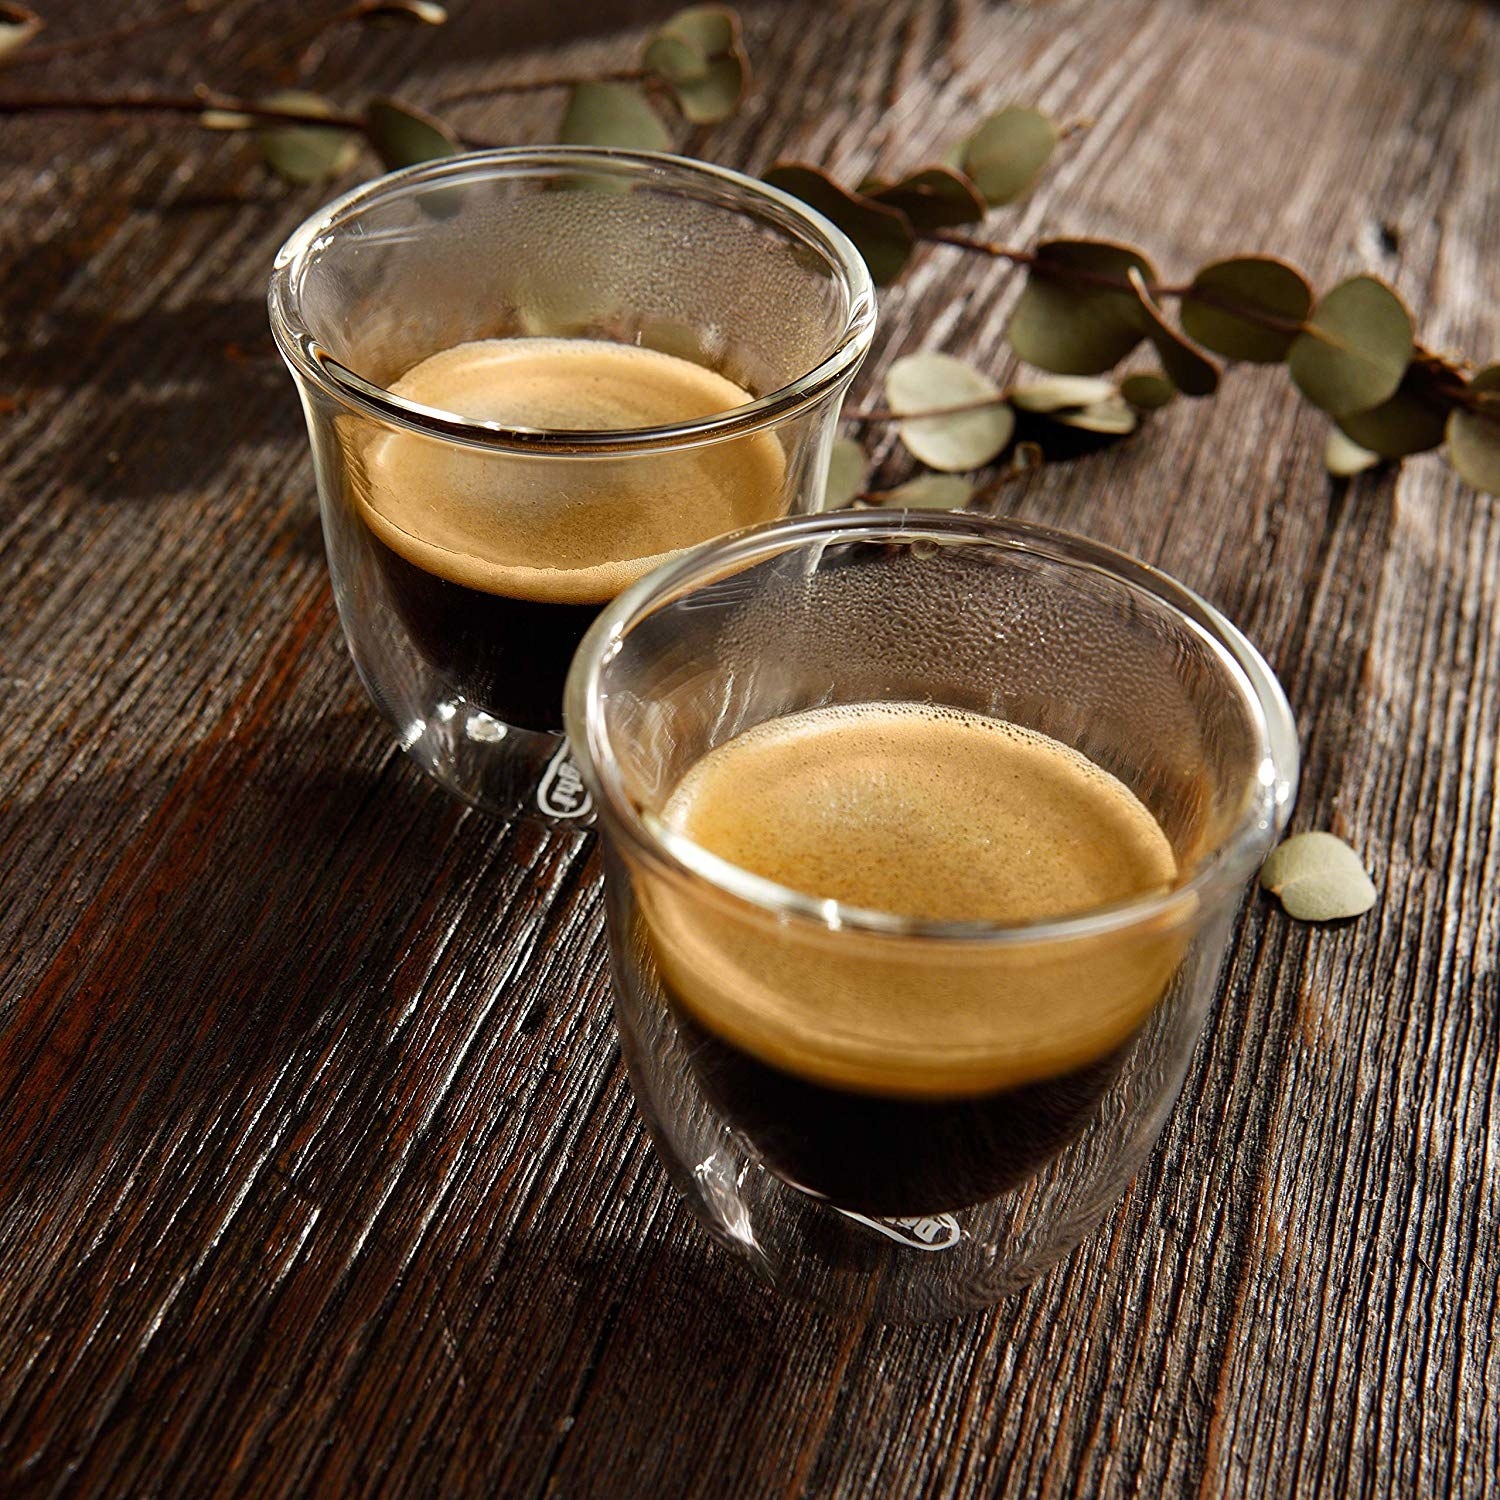 A pair of espresso glasses on a table